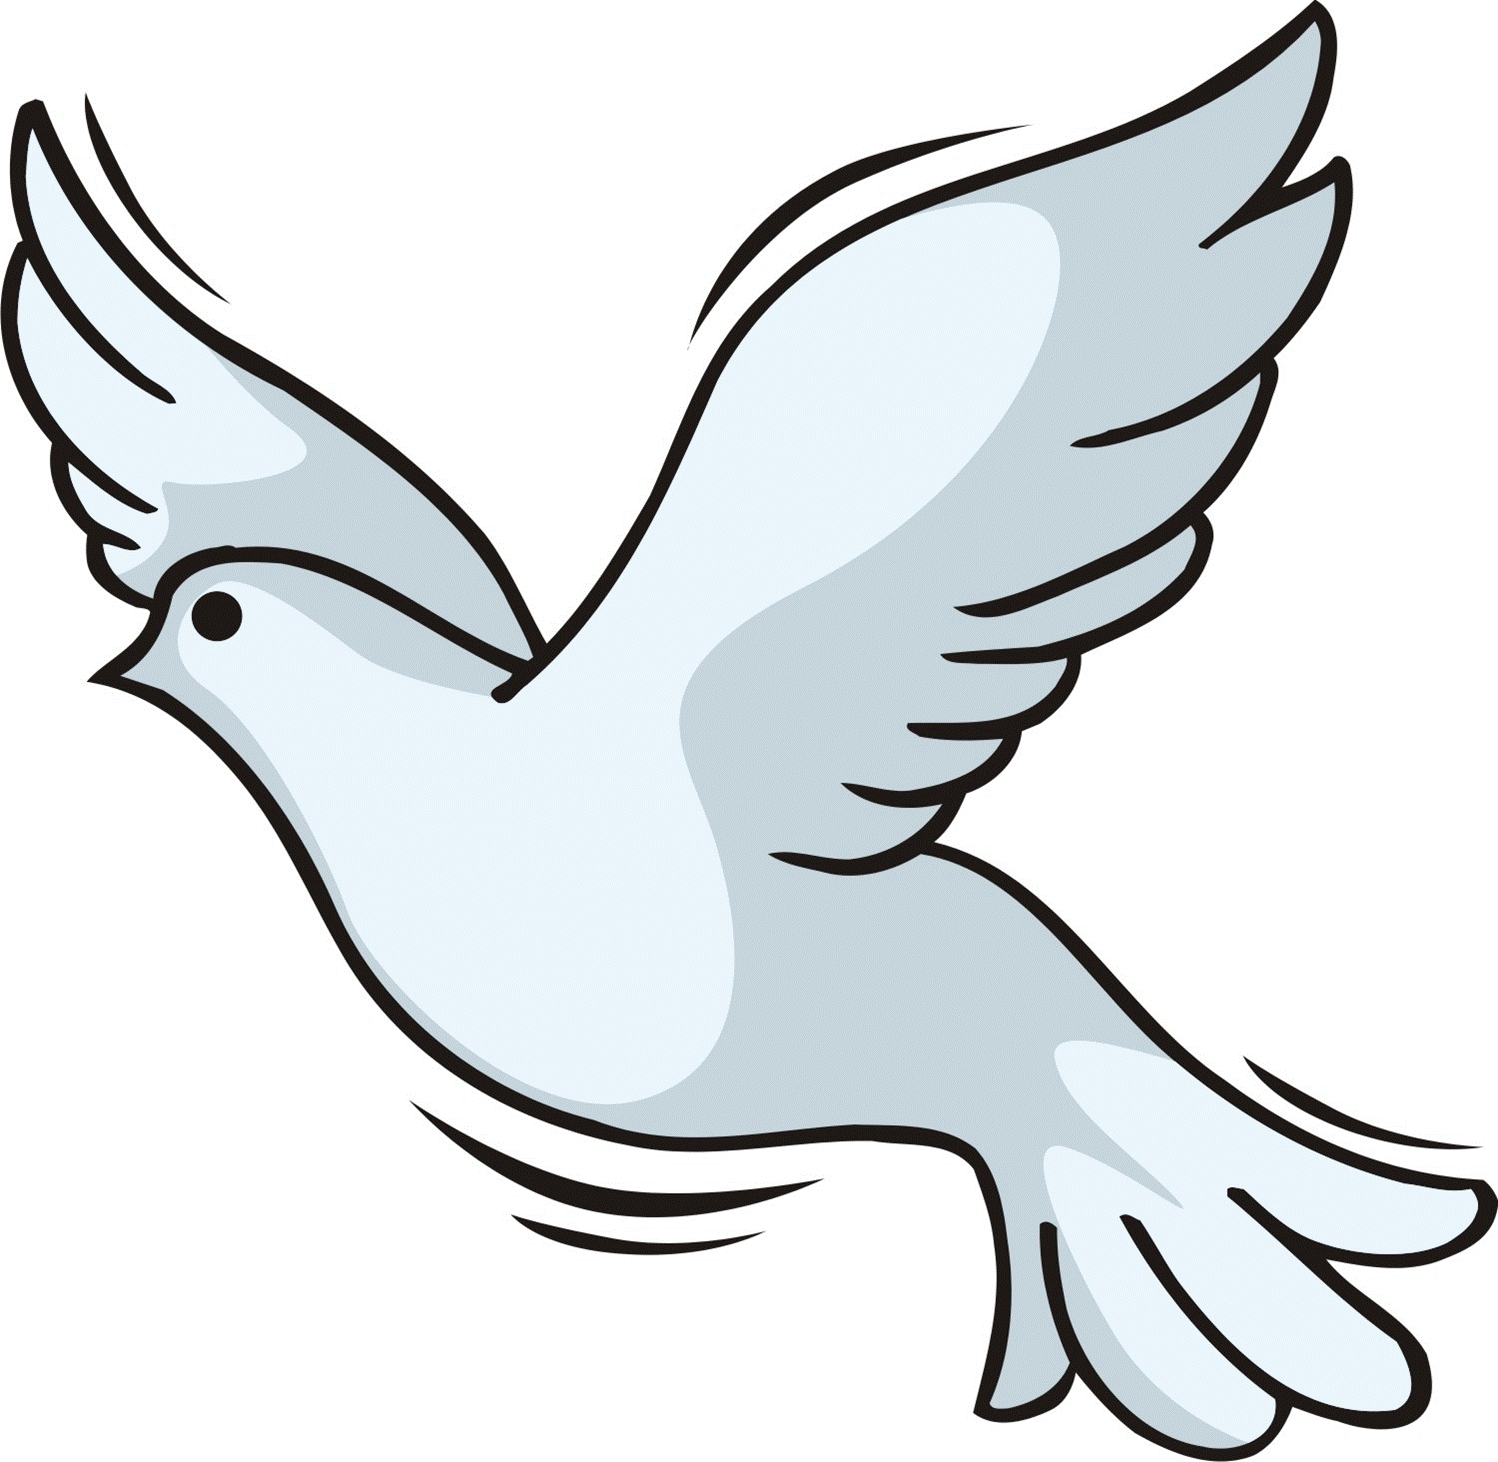 free christian clipart of doves - photo #19